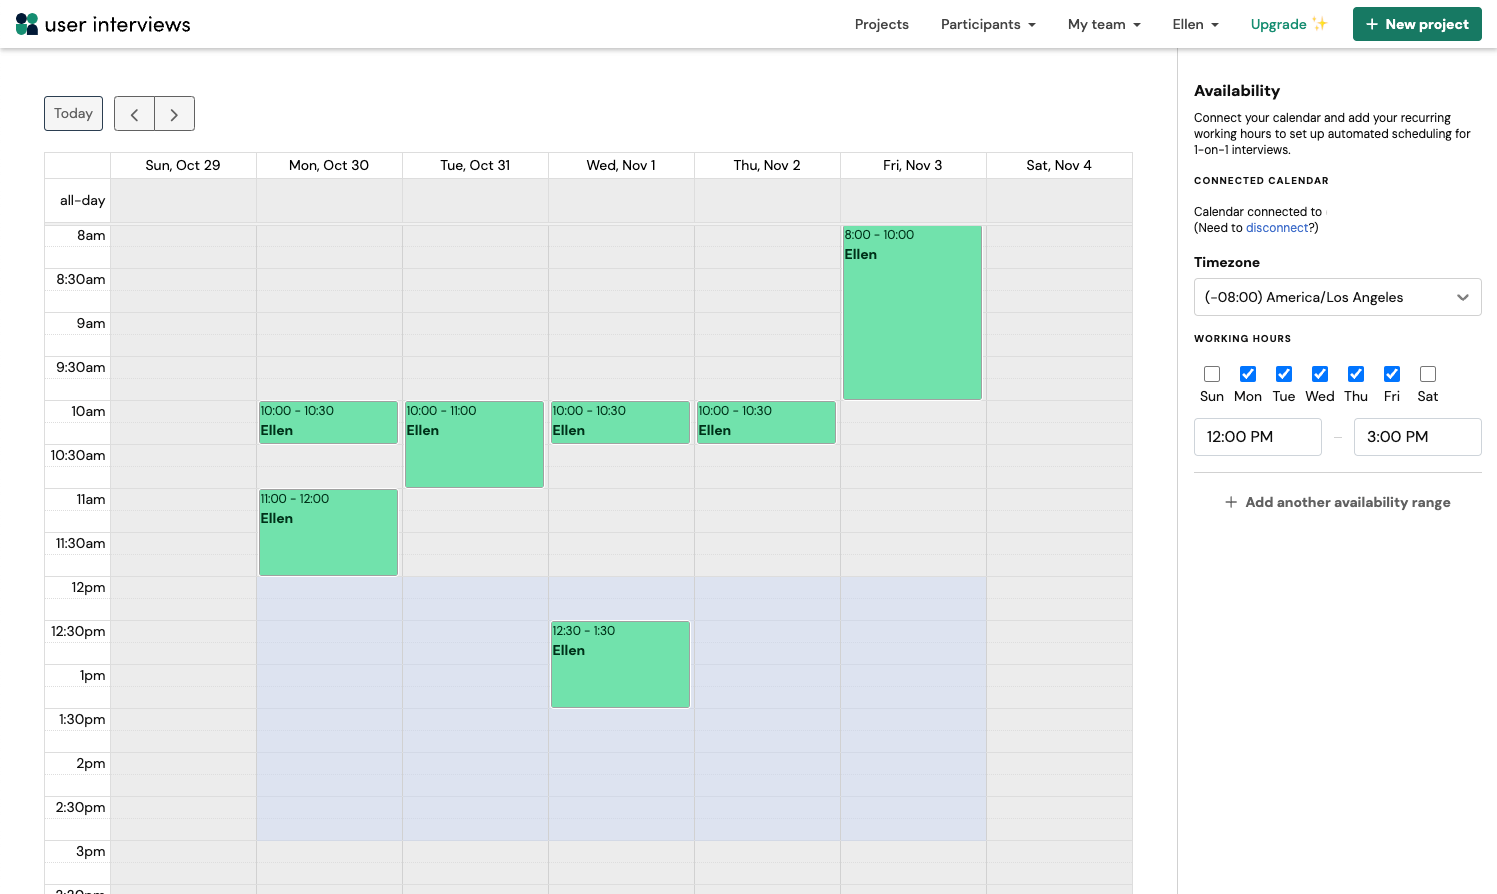 A screenshot of the calendar tool in UserInterviews, showing how you can show the days and times when you're available to conduct interviews.